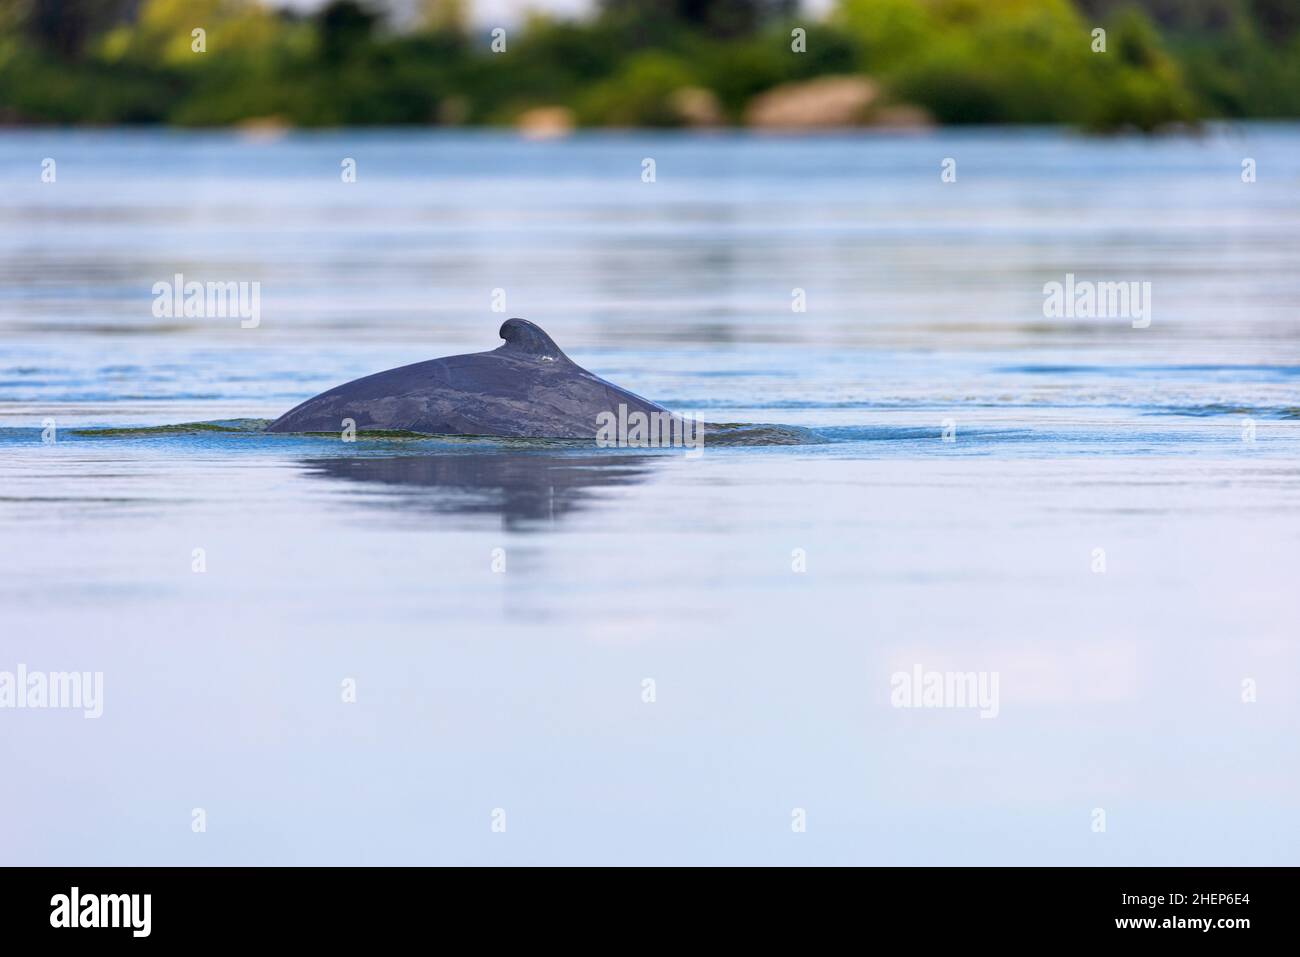 The Irrawaddy dolphin (Orcaella brevirostris) on the Mekong River, Cambodia Stock Photo